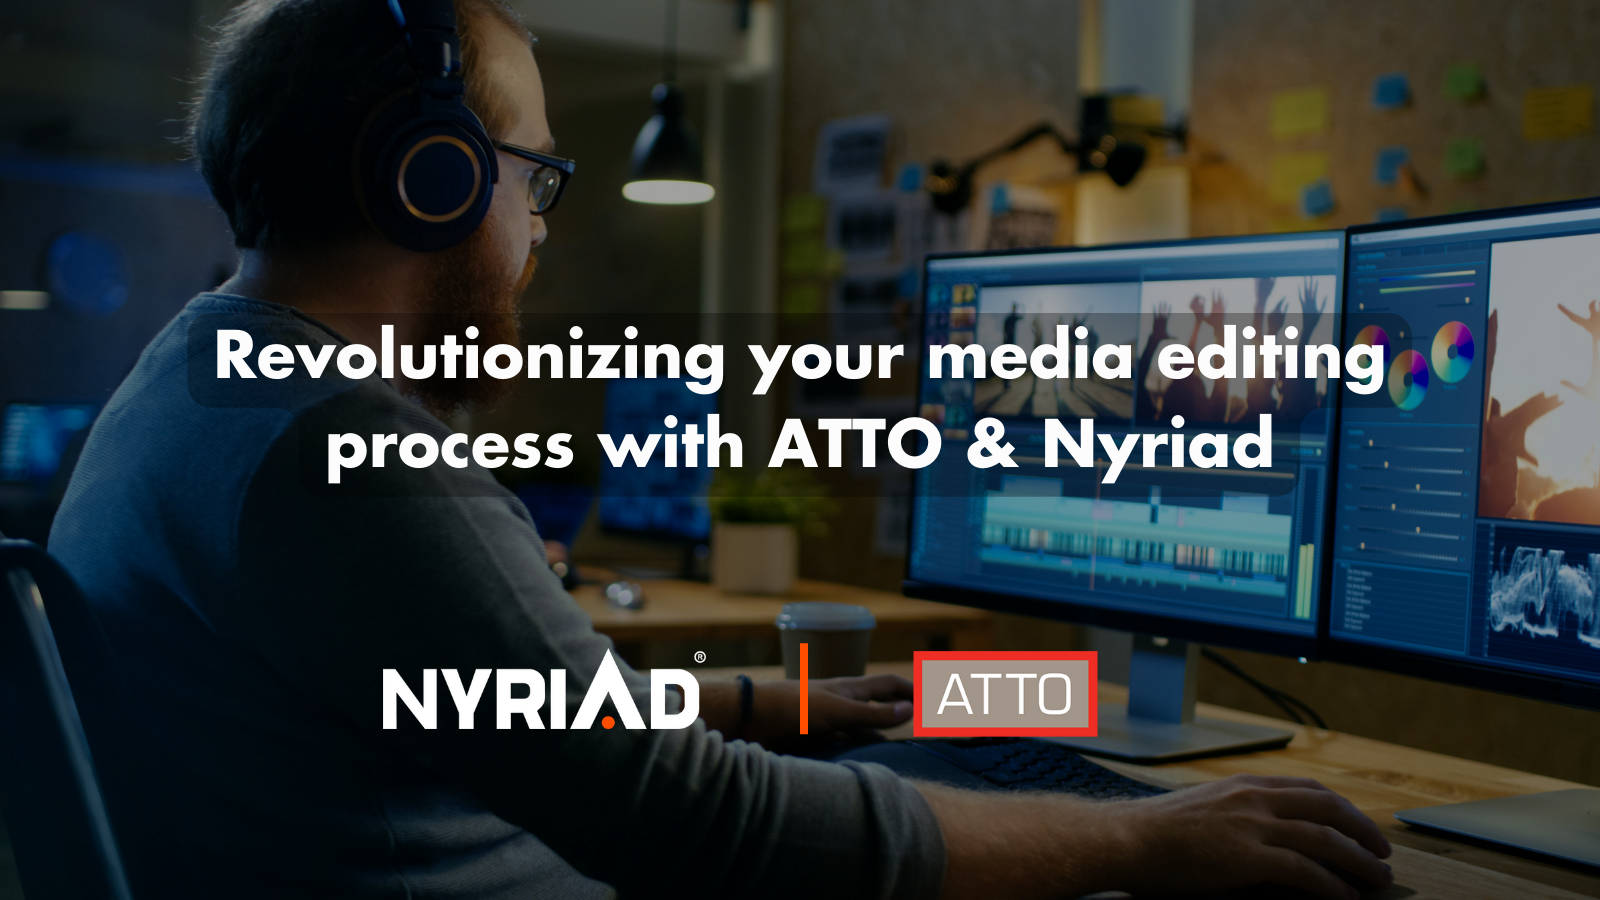 Revolutionizing your media editing process with Nyriad and ATTO